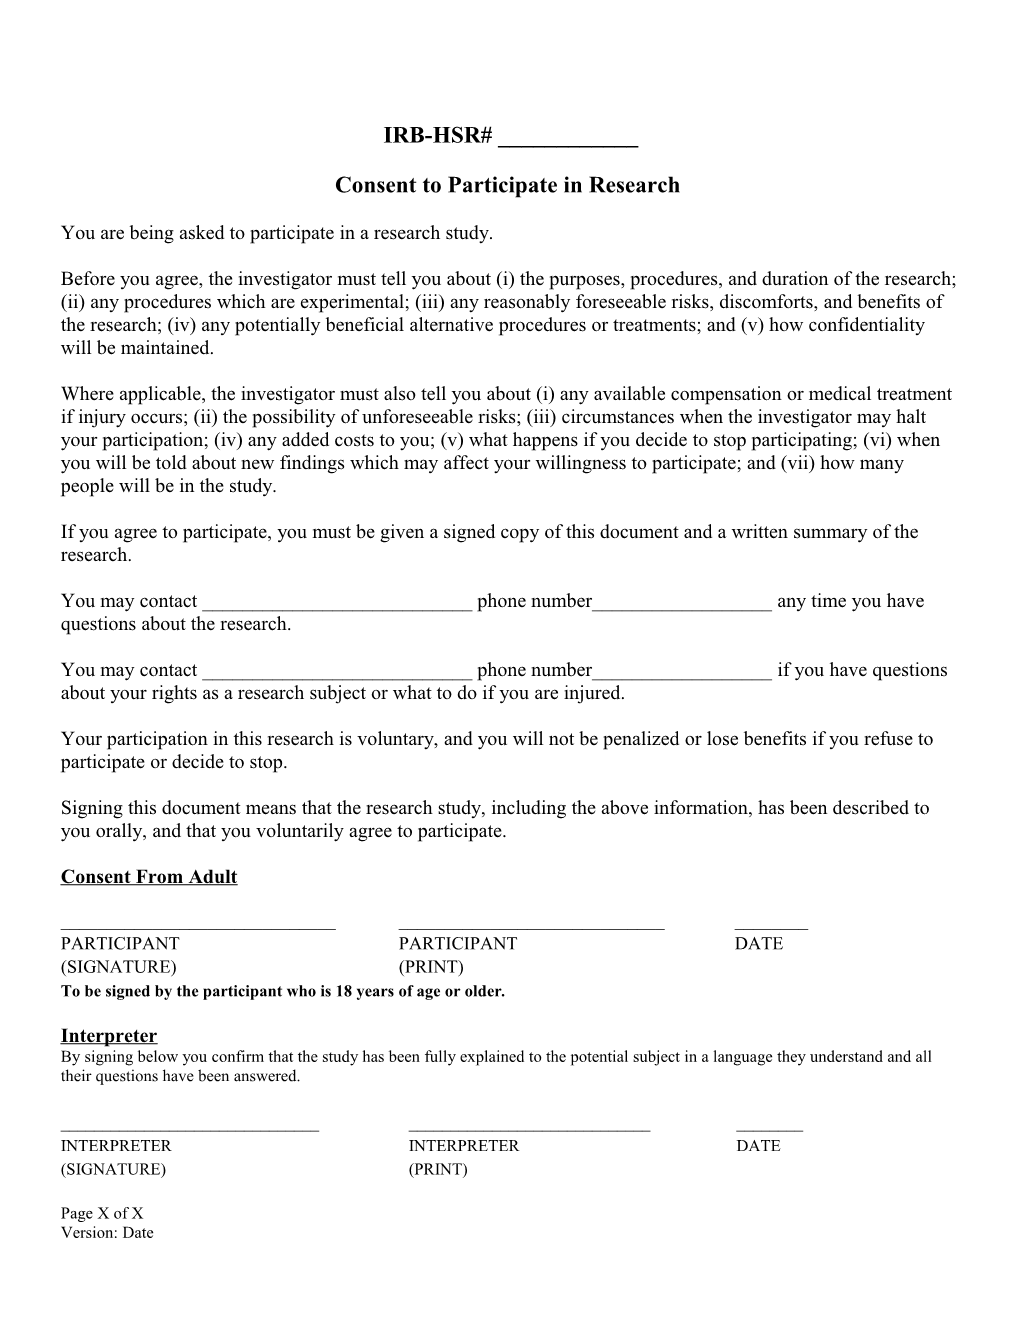 Sample Short Form Written Consent Document for Subjects Who Do Not Speak English